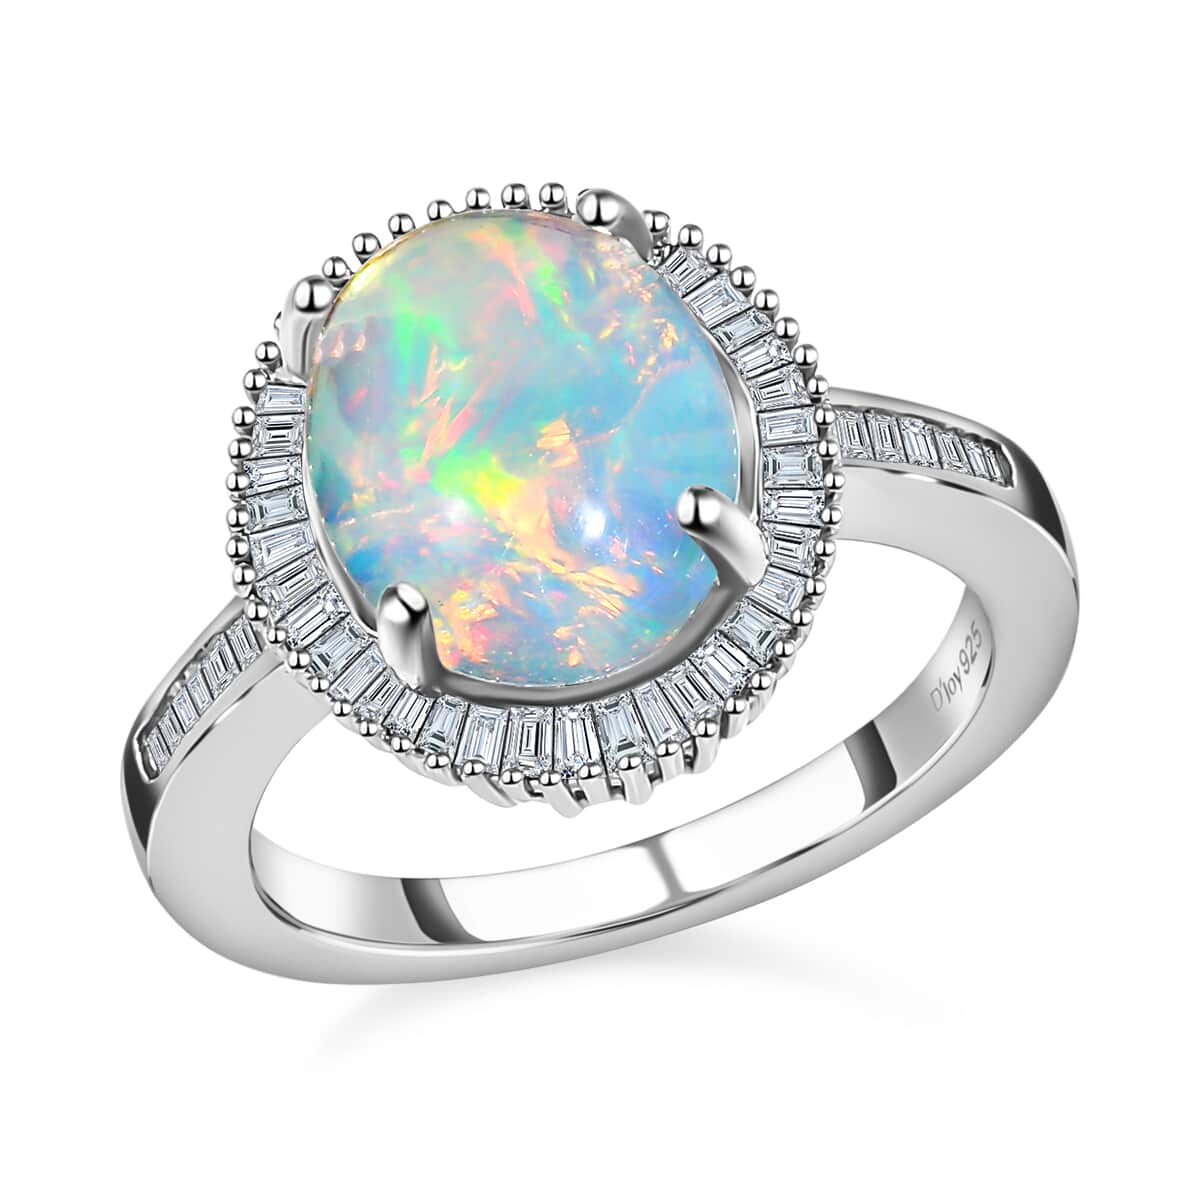 Buy Ethiopian Welo Opal, Diamond Ring in Platinum Over Sterling Silver ...